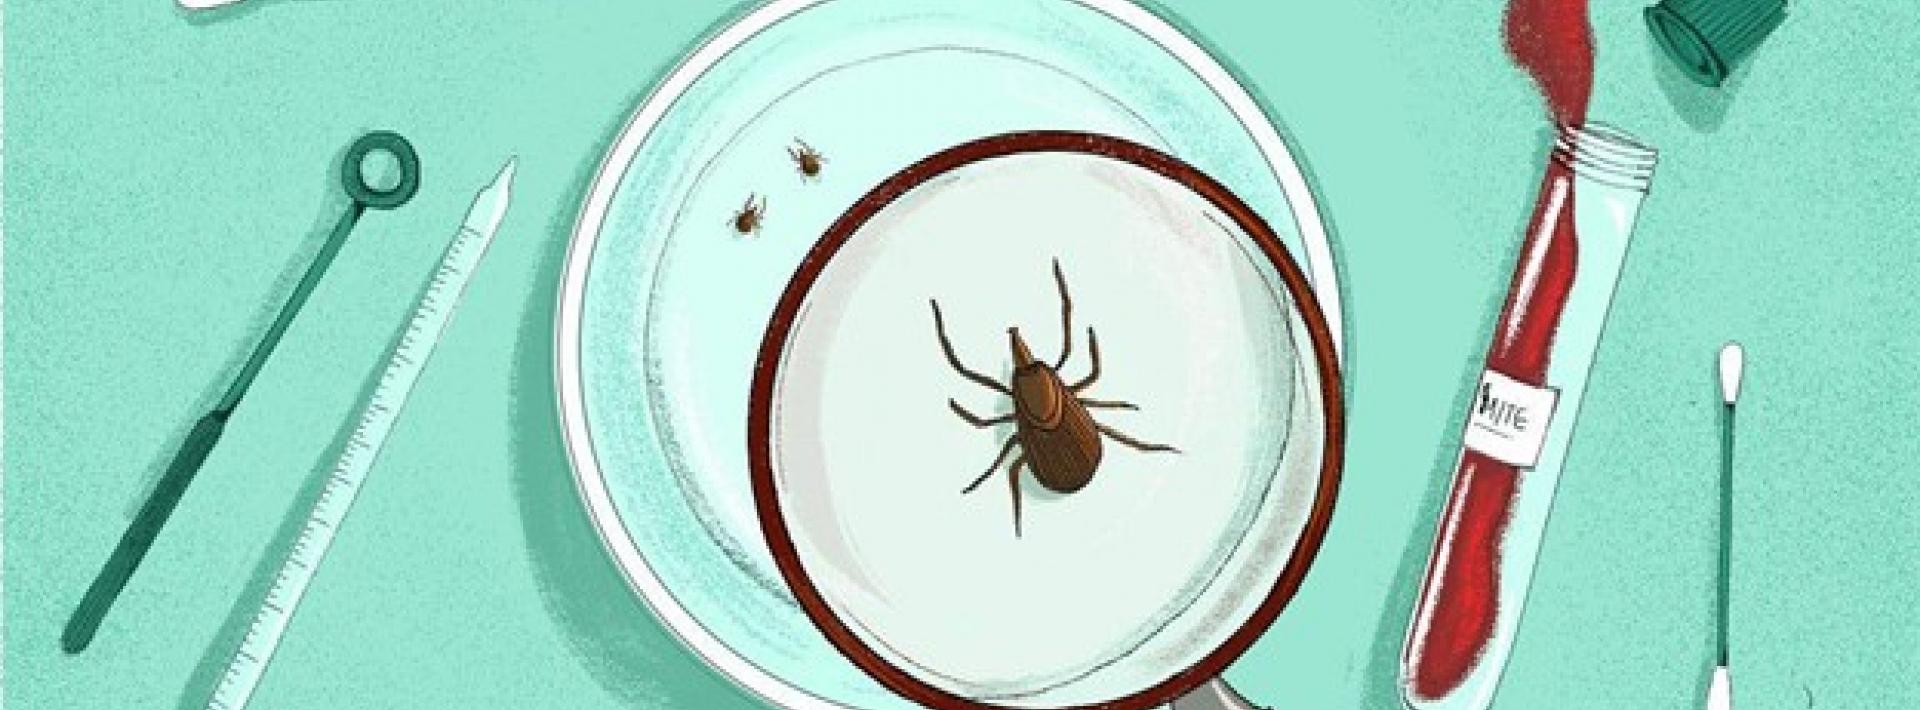 illustration of tick under magnifying glass